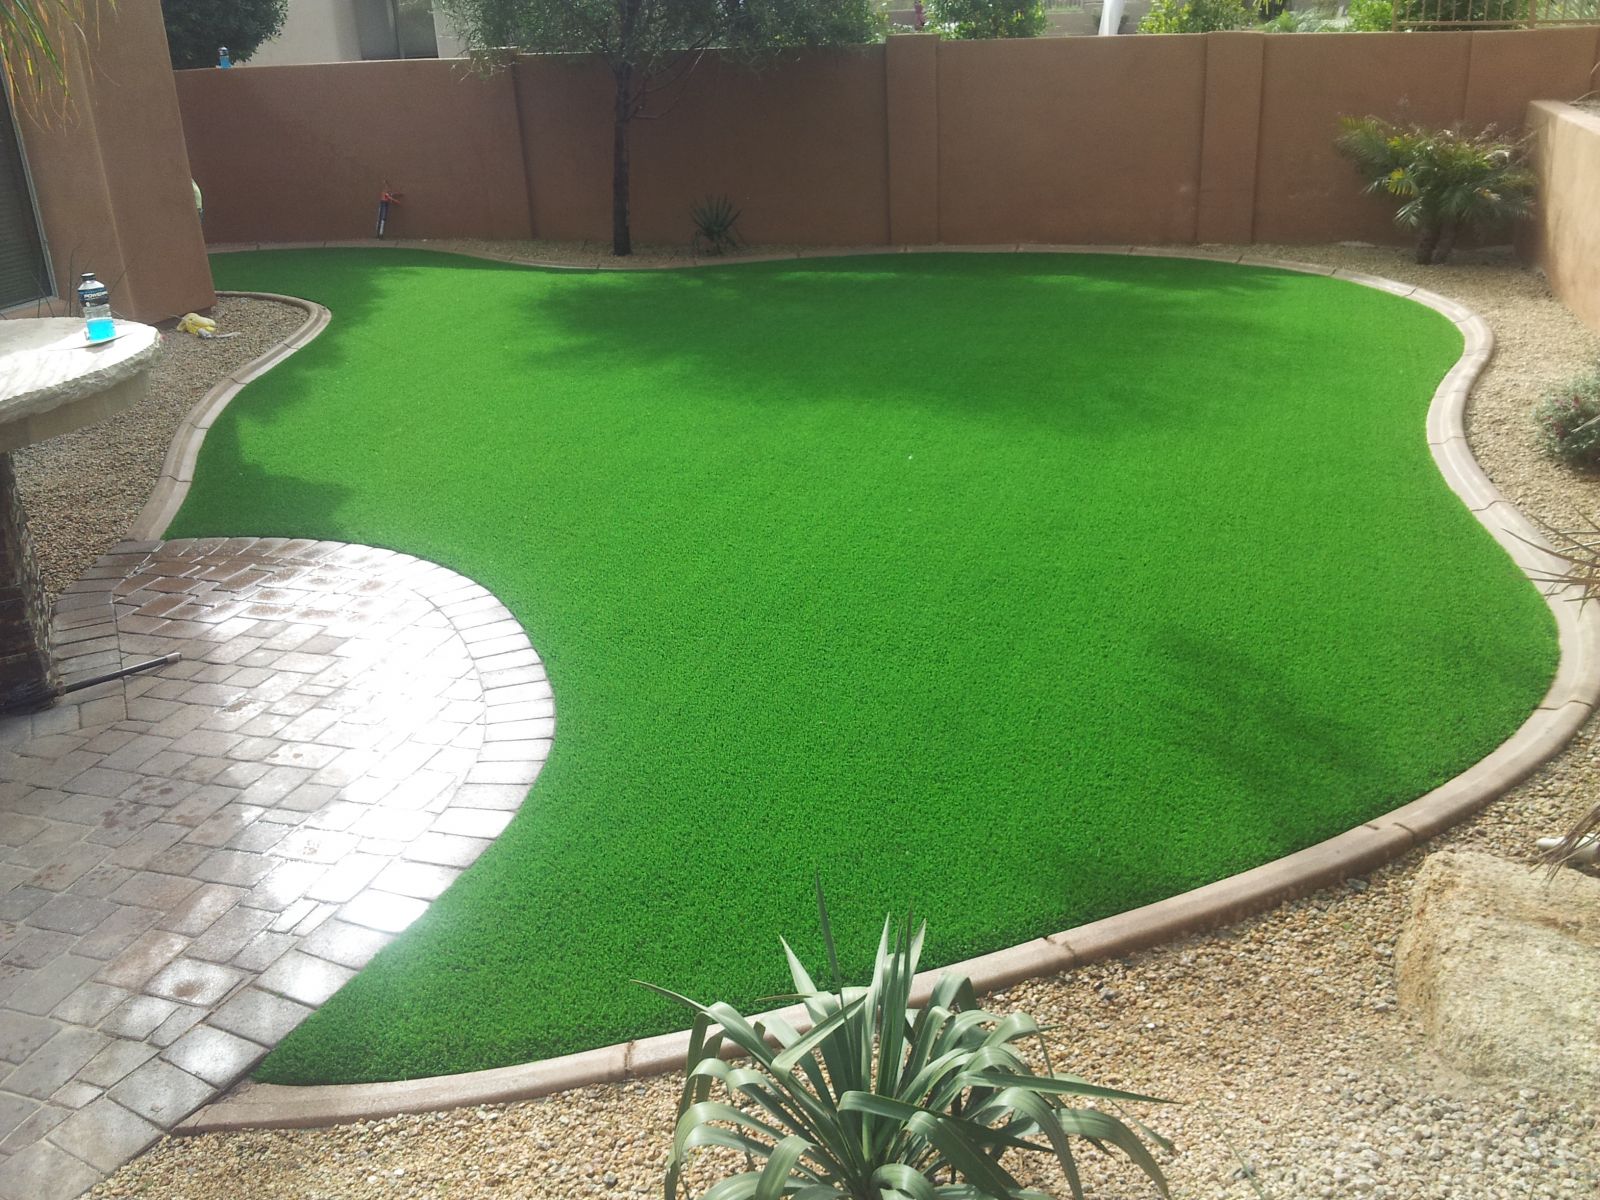 Luxury Turf is the Best Choice for Artificial Turf in Mesa